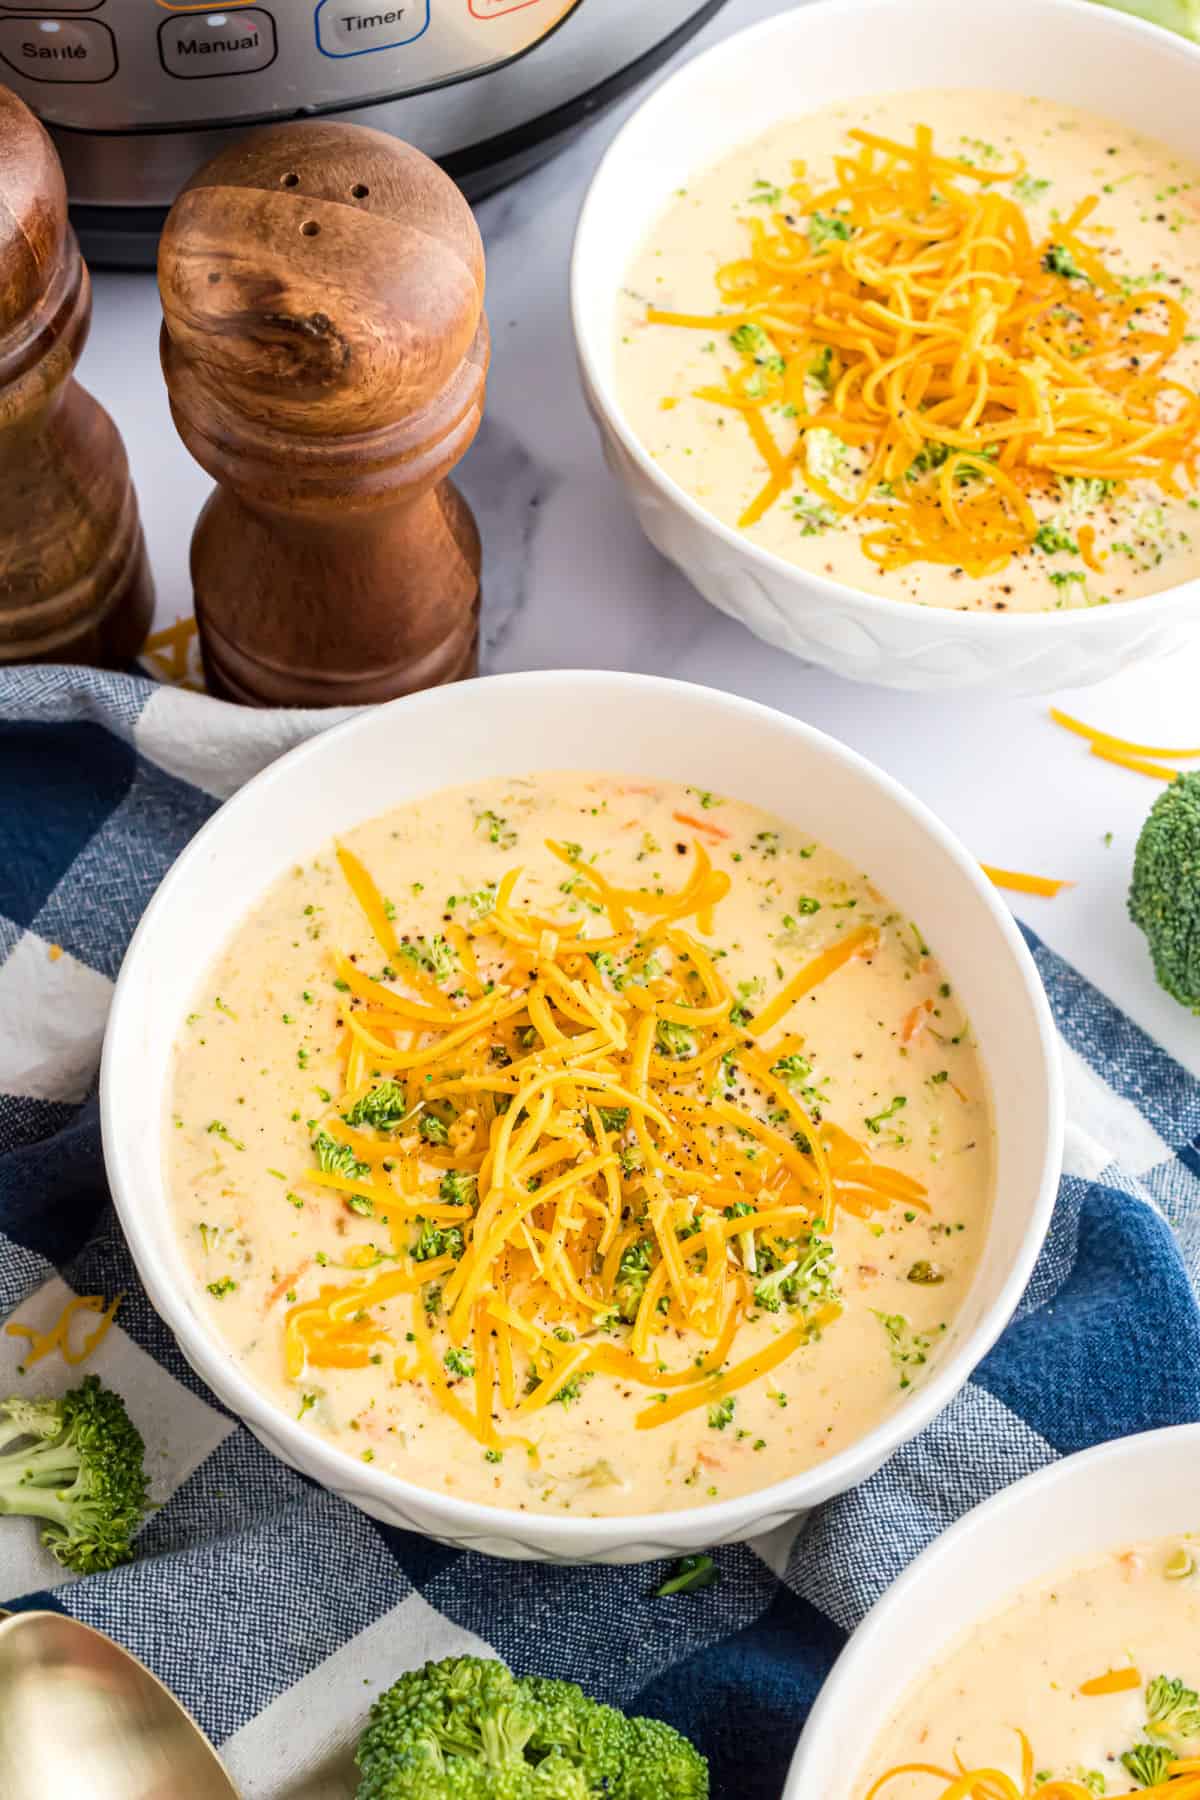 Two bowls of broccoli cheddar soup.